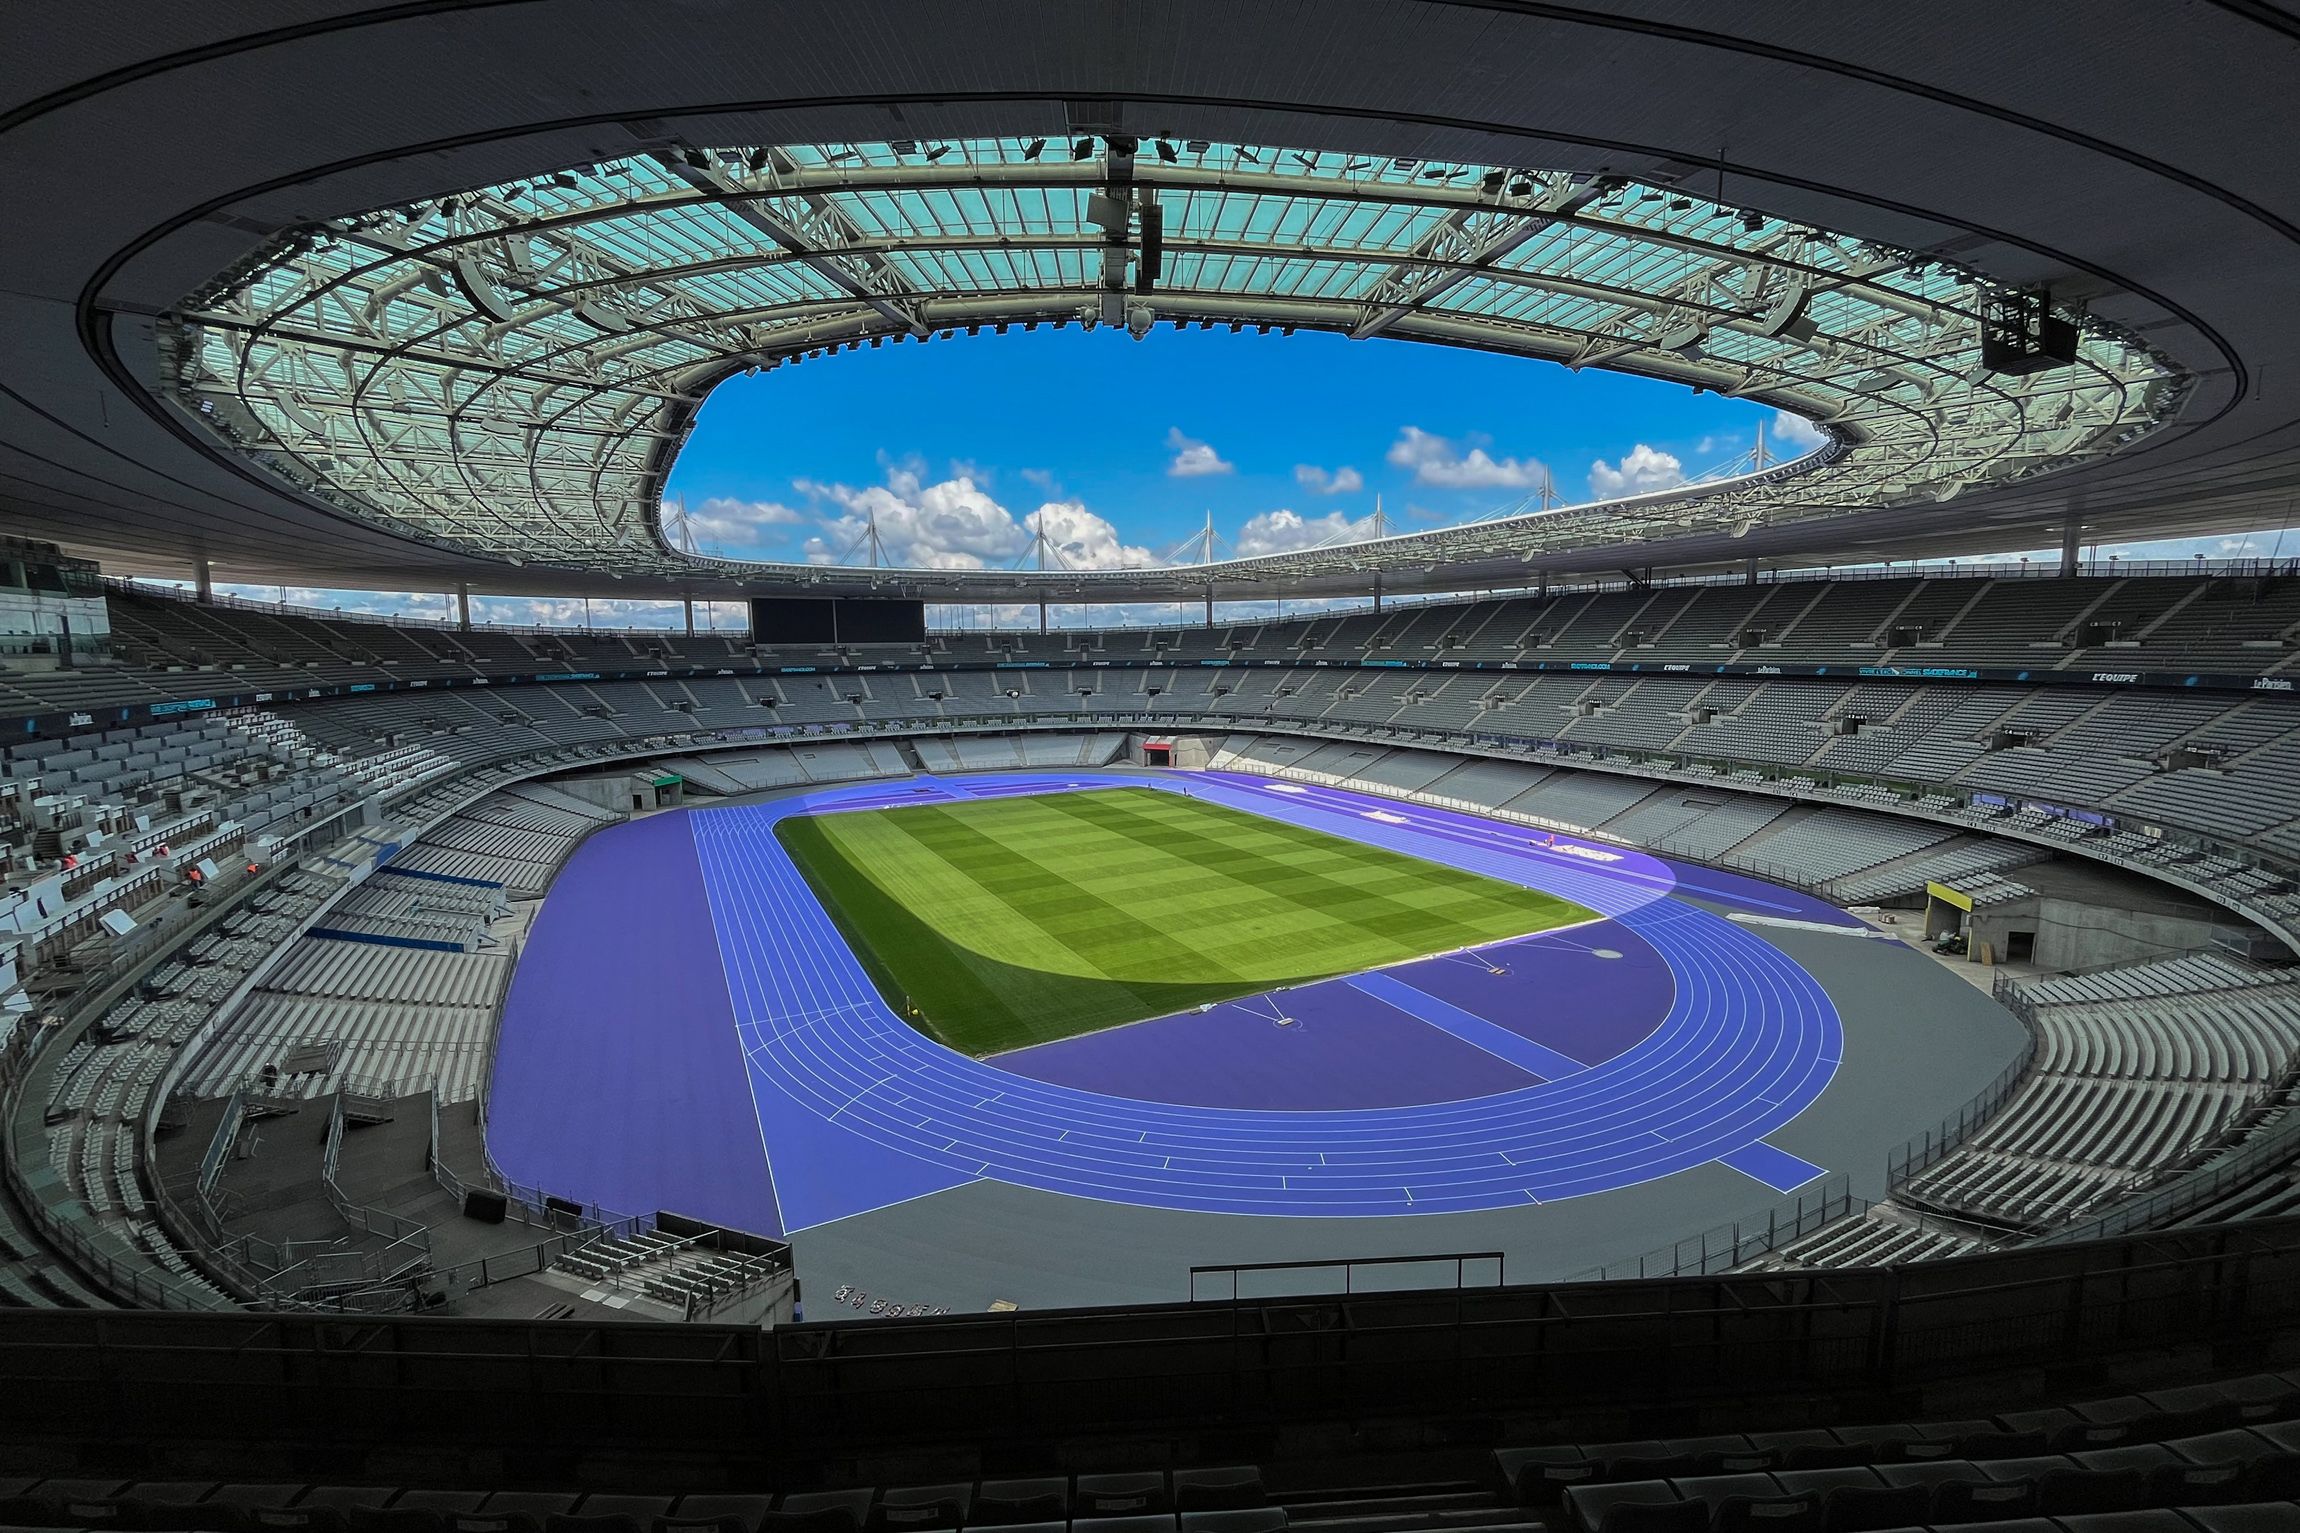 Stade de France, venue for the athletics at the Paris 2024 Olympic Games